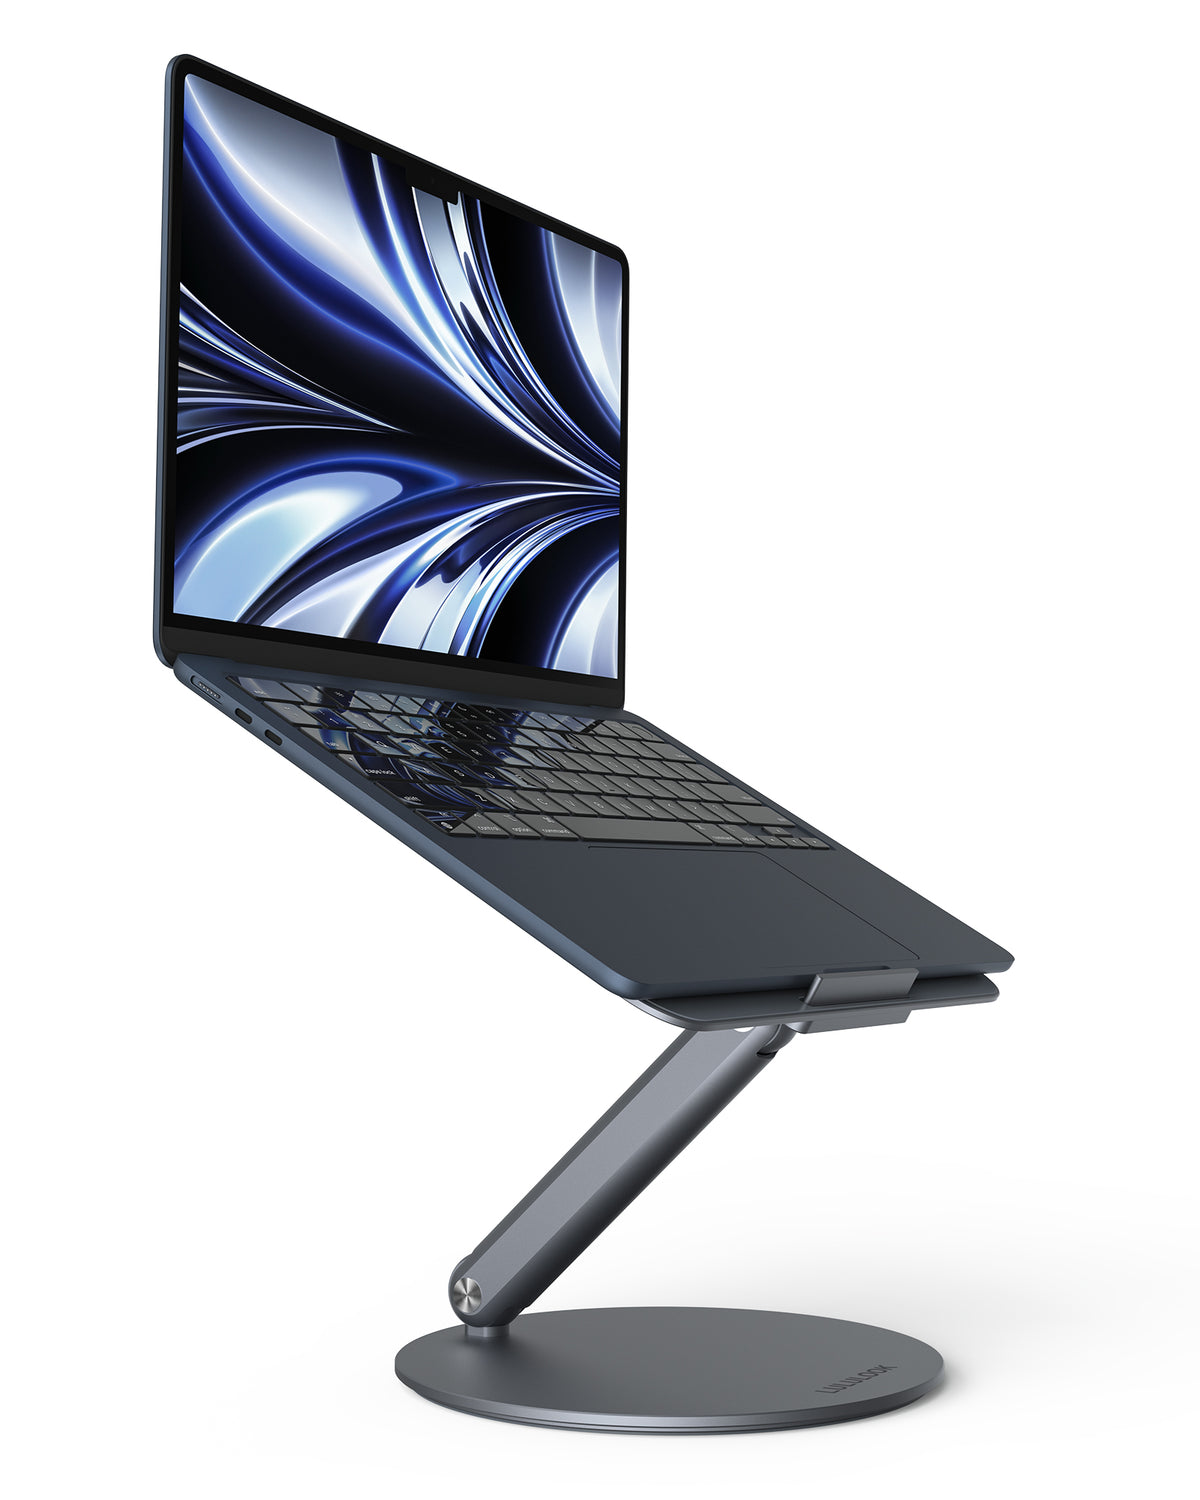 LULULOOK-360-Rotating-Foldable-Laptop-Stand-1